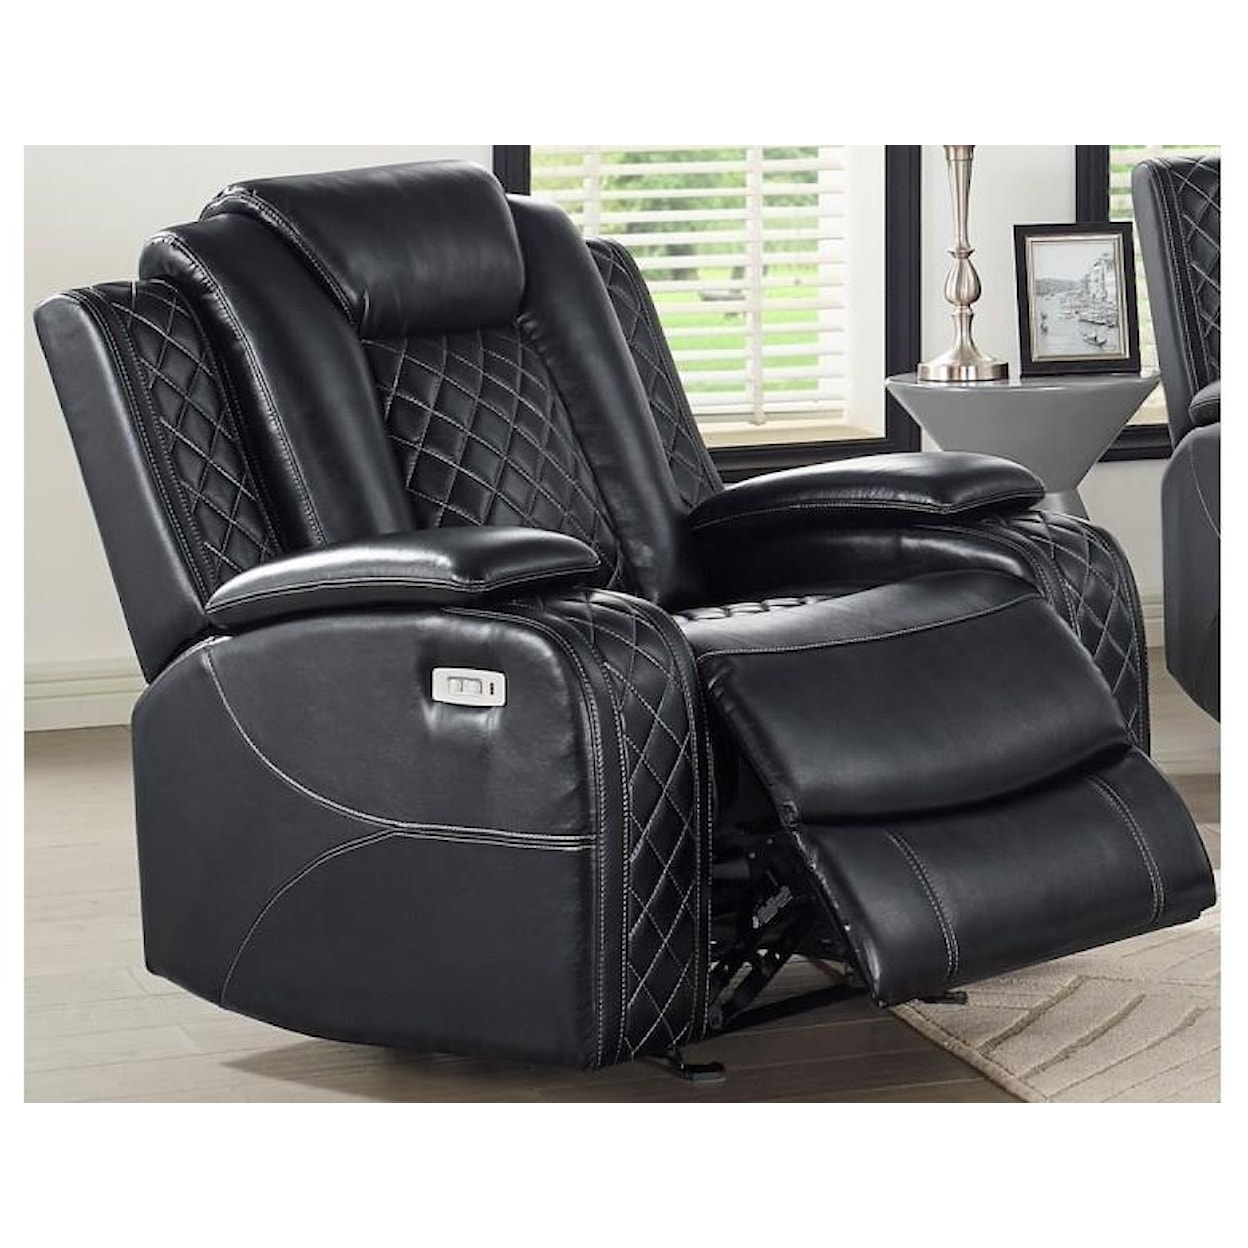 New Classic Furniture Orion POWER 2 RECLINER